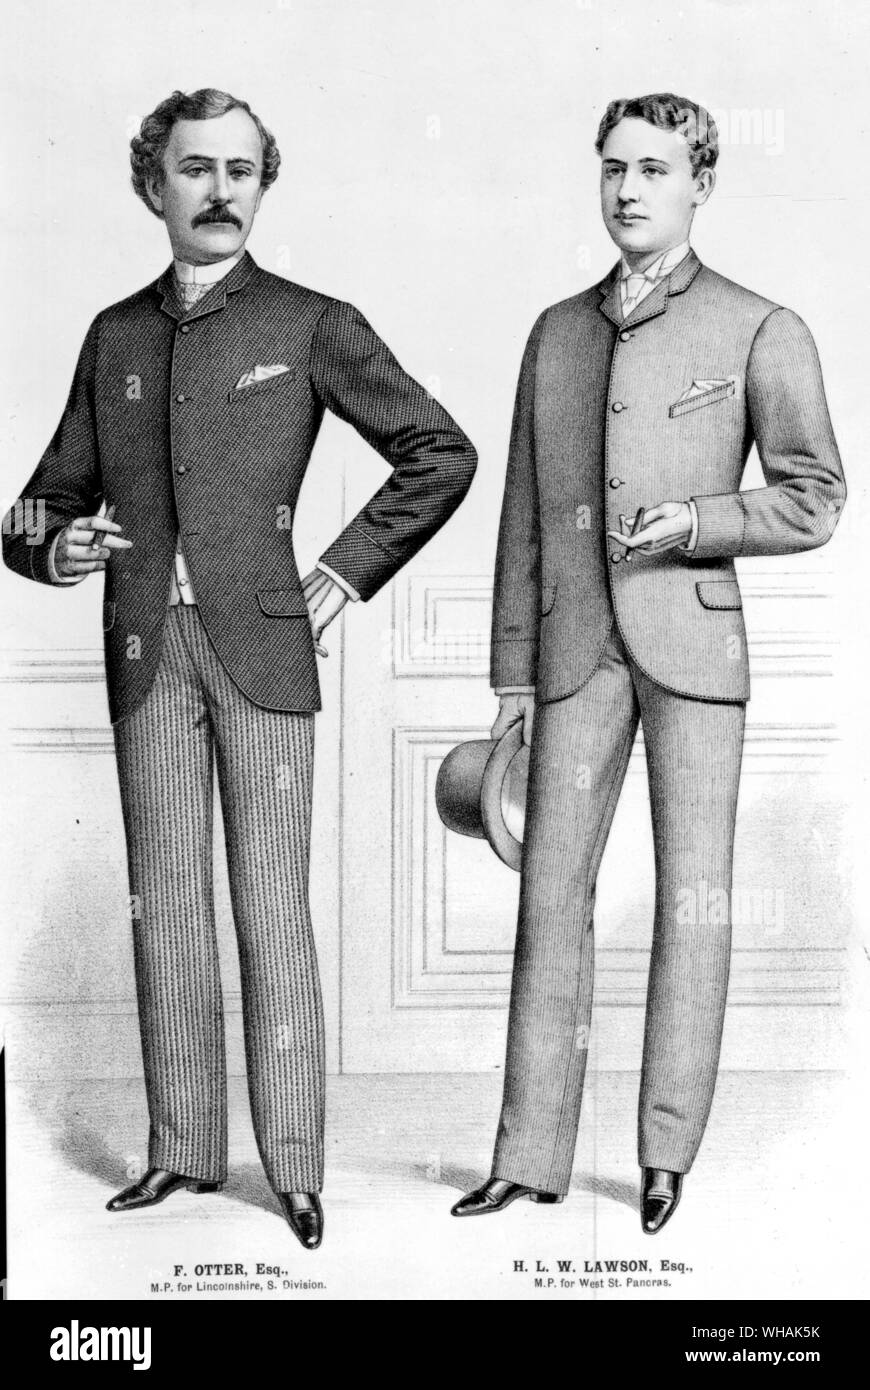 Tailor and Cutter. 1886. Left: Mourning coat. Right: Lounge suit night. . British costume for spring and summer. Left: Mr F Otter MP for Lincolnshire . Right: H L W Lawson MP for West St Pancras Stock Photo